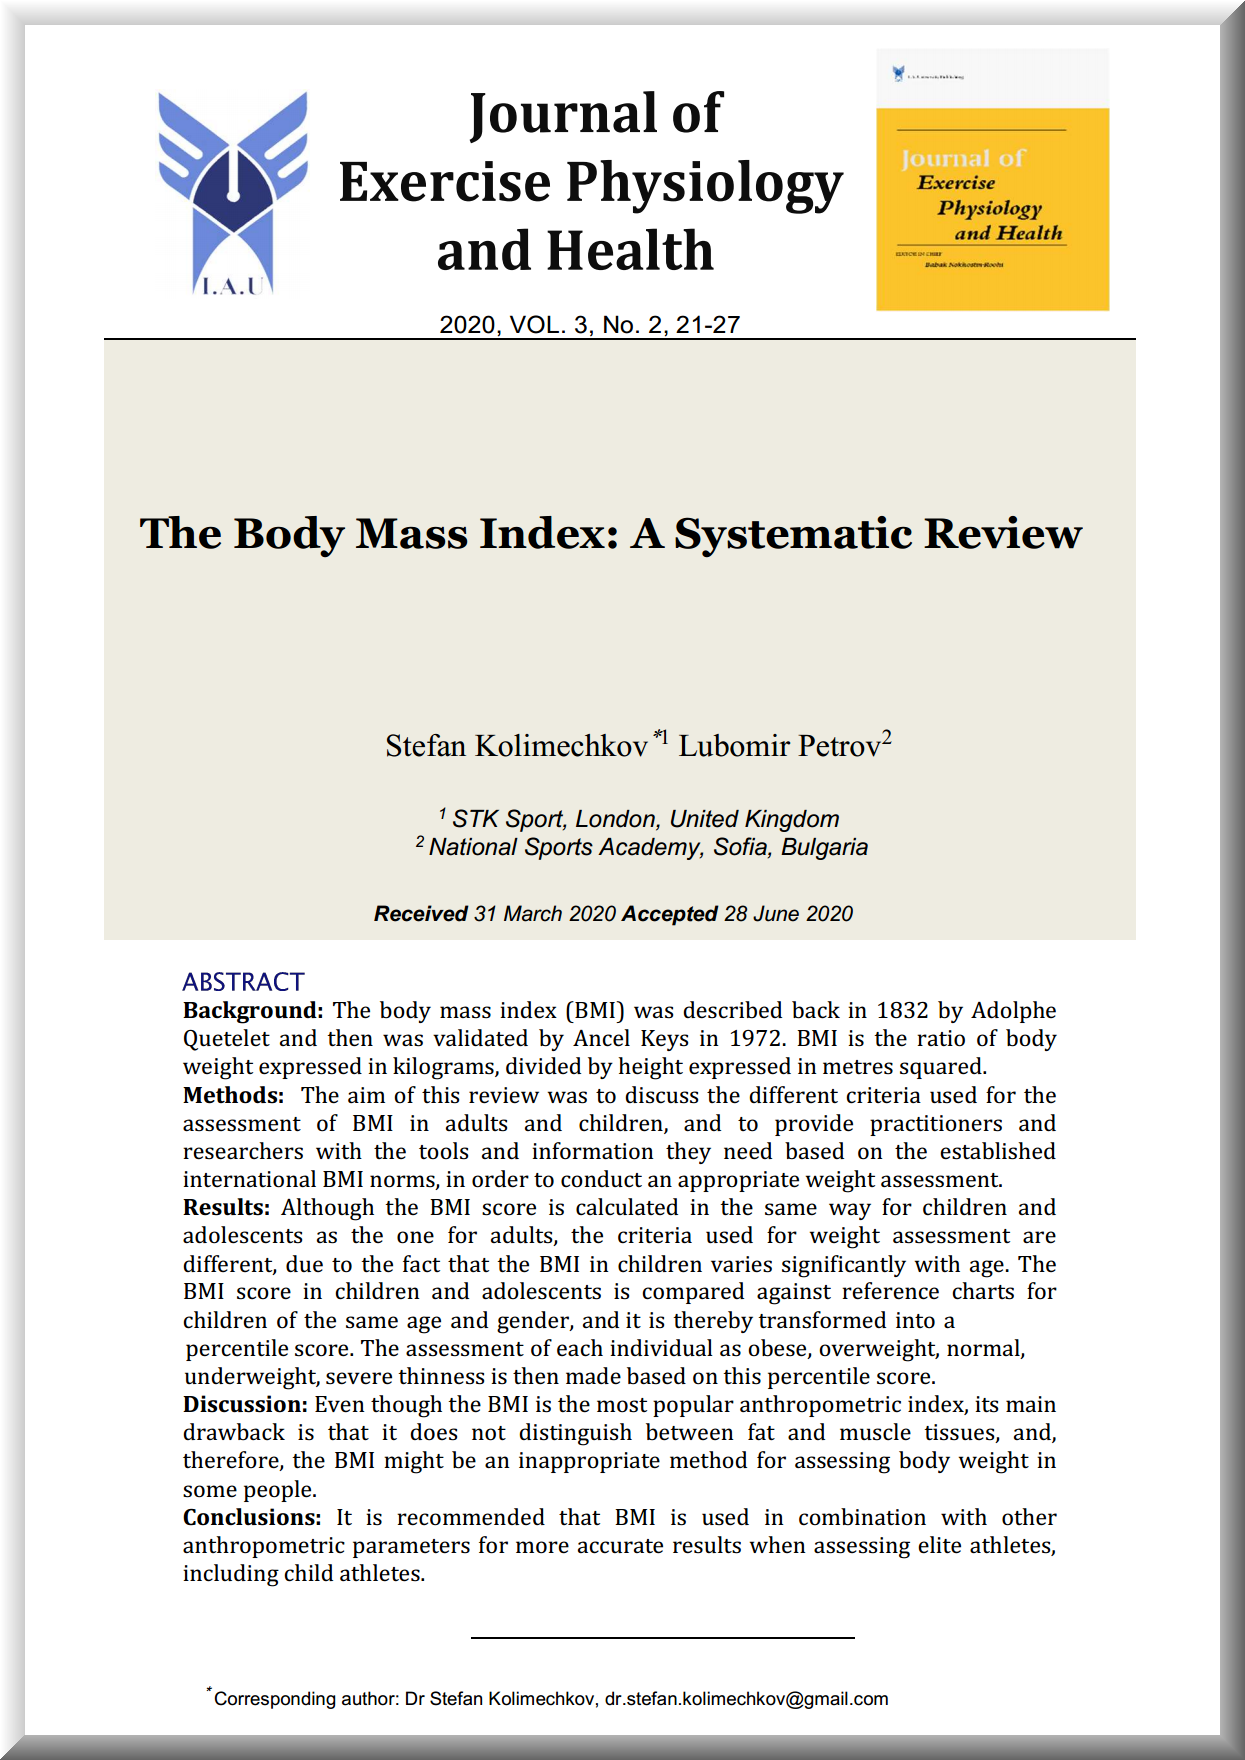 The Body Mass Index: A Systematic Review (2020)